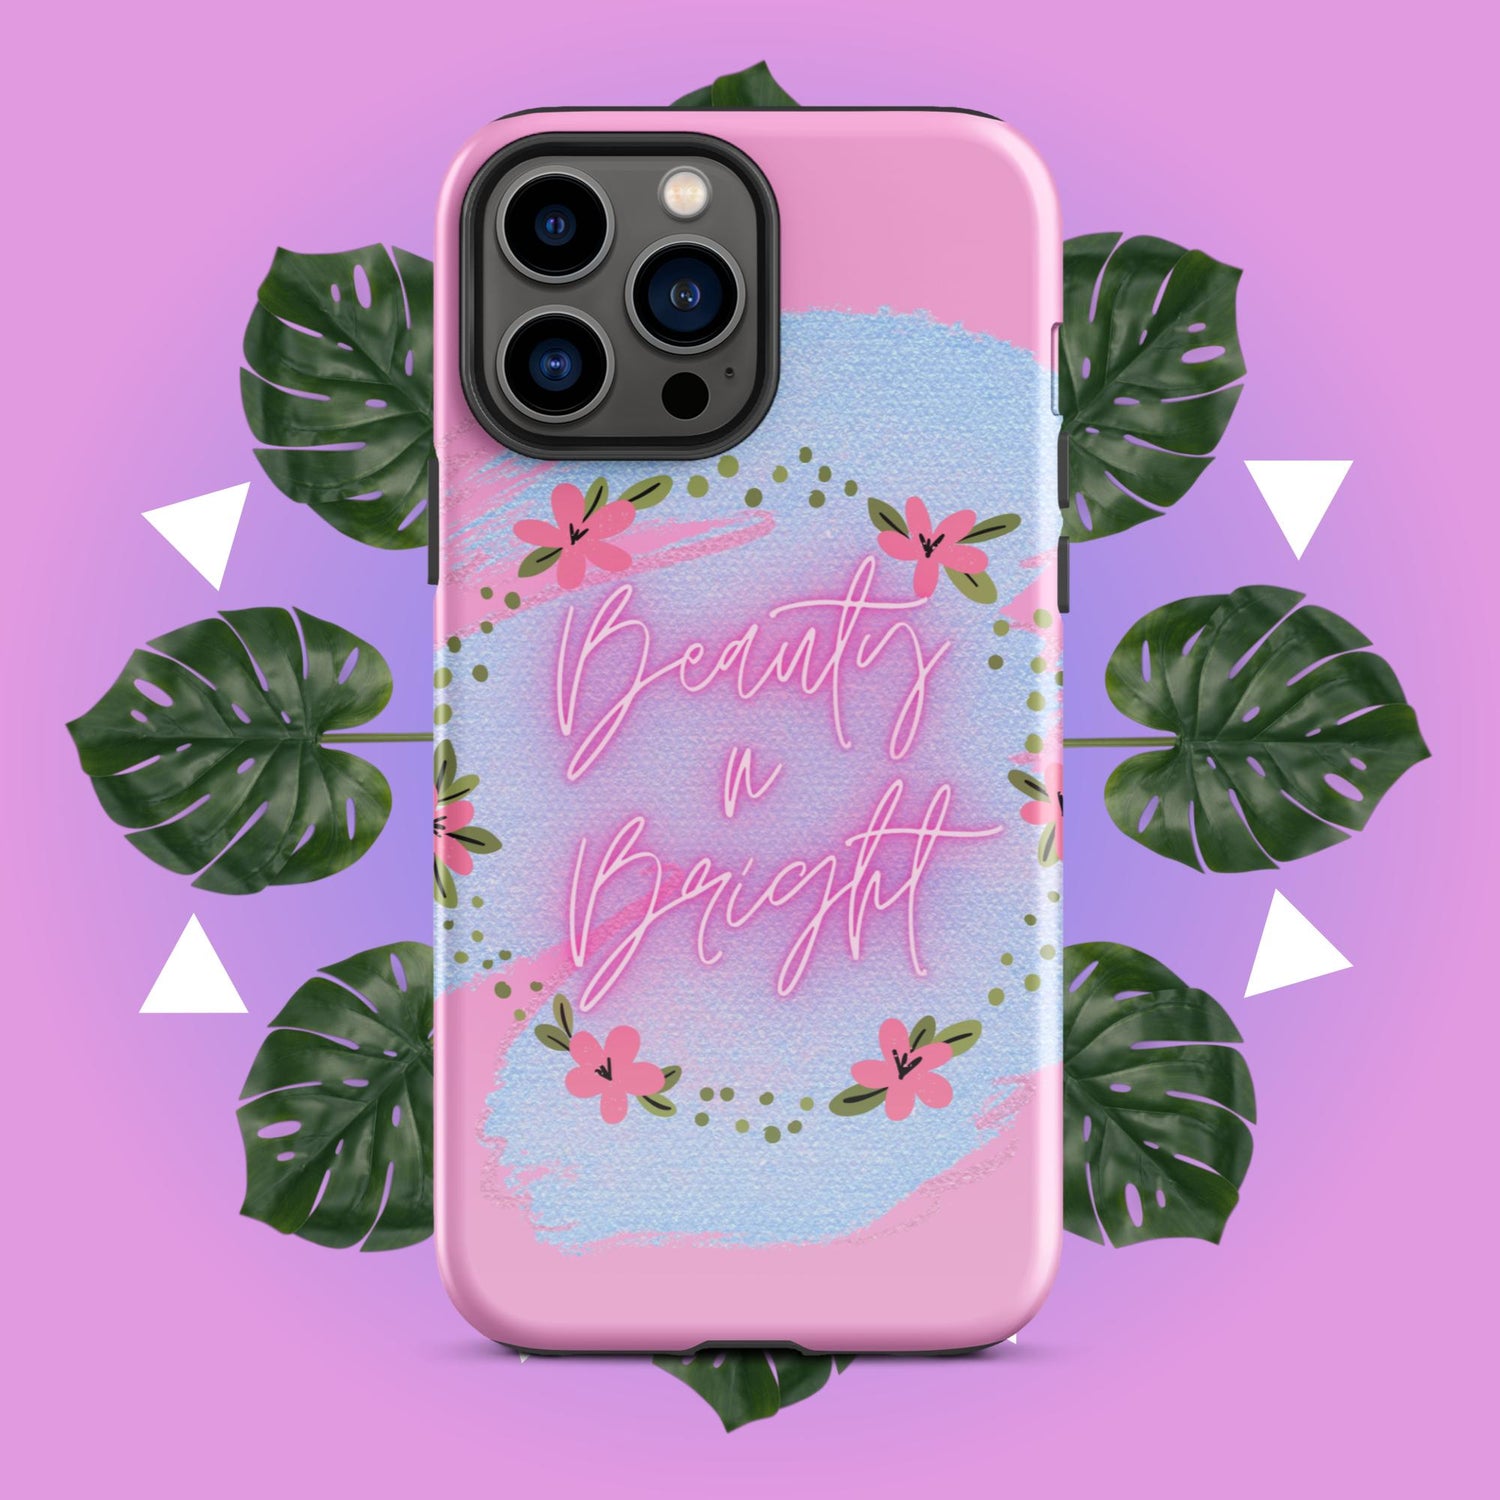 Beauty n Bright - Iphone Case